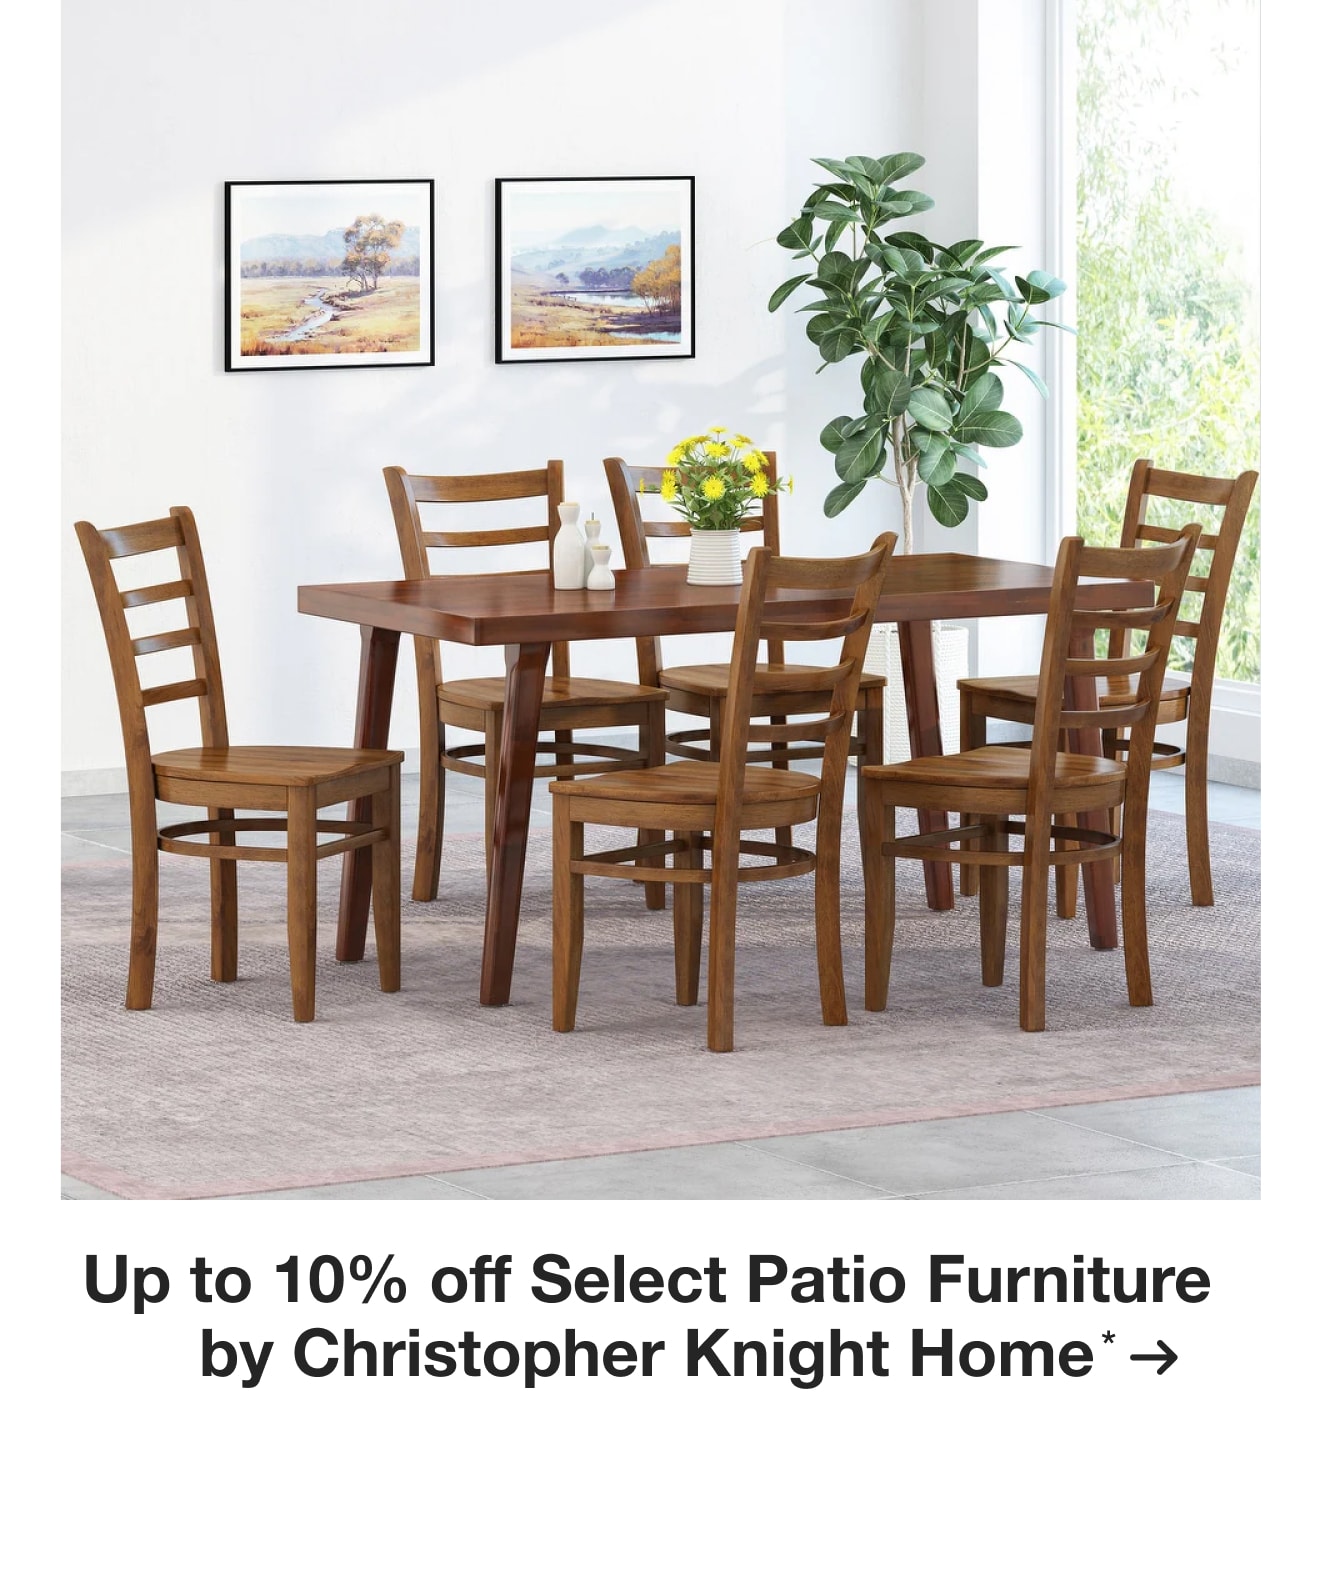 Up to 10% off Select Patio Furniture by Christopher Knight Home*